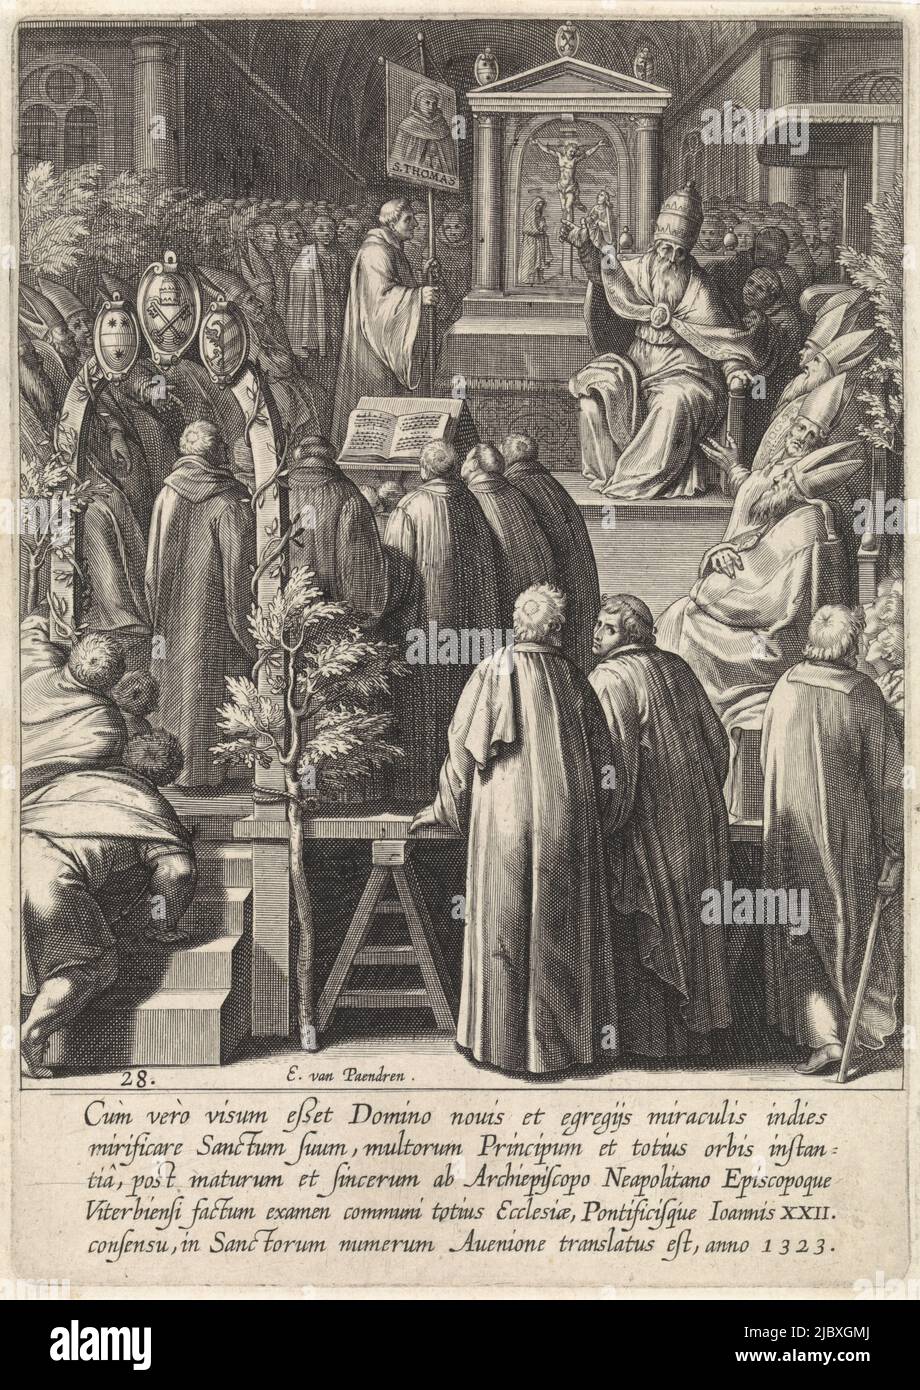 Church interior with Pope John XXII pointing to an image of Thomas Aquinas. He is surrounded by monks and bishops. In the margin a five-line caption in Latin. Twenty-eighth print in a series of thirty prints depicting the life story of Thomas Aquinas., Sanctification of Thomas Aquinas The Life of St. Thomas Aquinas (series title), print maker: Egbert van Panderen, (mentioned on object), Otto van Veen, publisher: Otto van Veen, Antwerp, 1610, paper, engraving, h 209 mm × w 147 mm Stock Photo